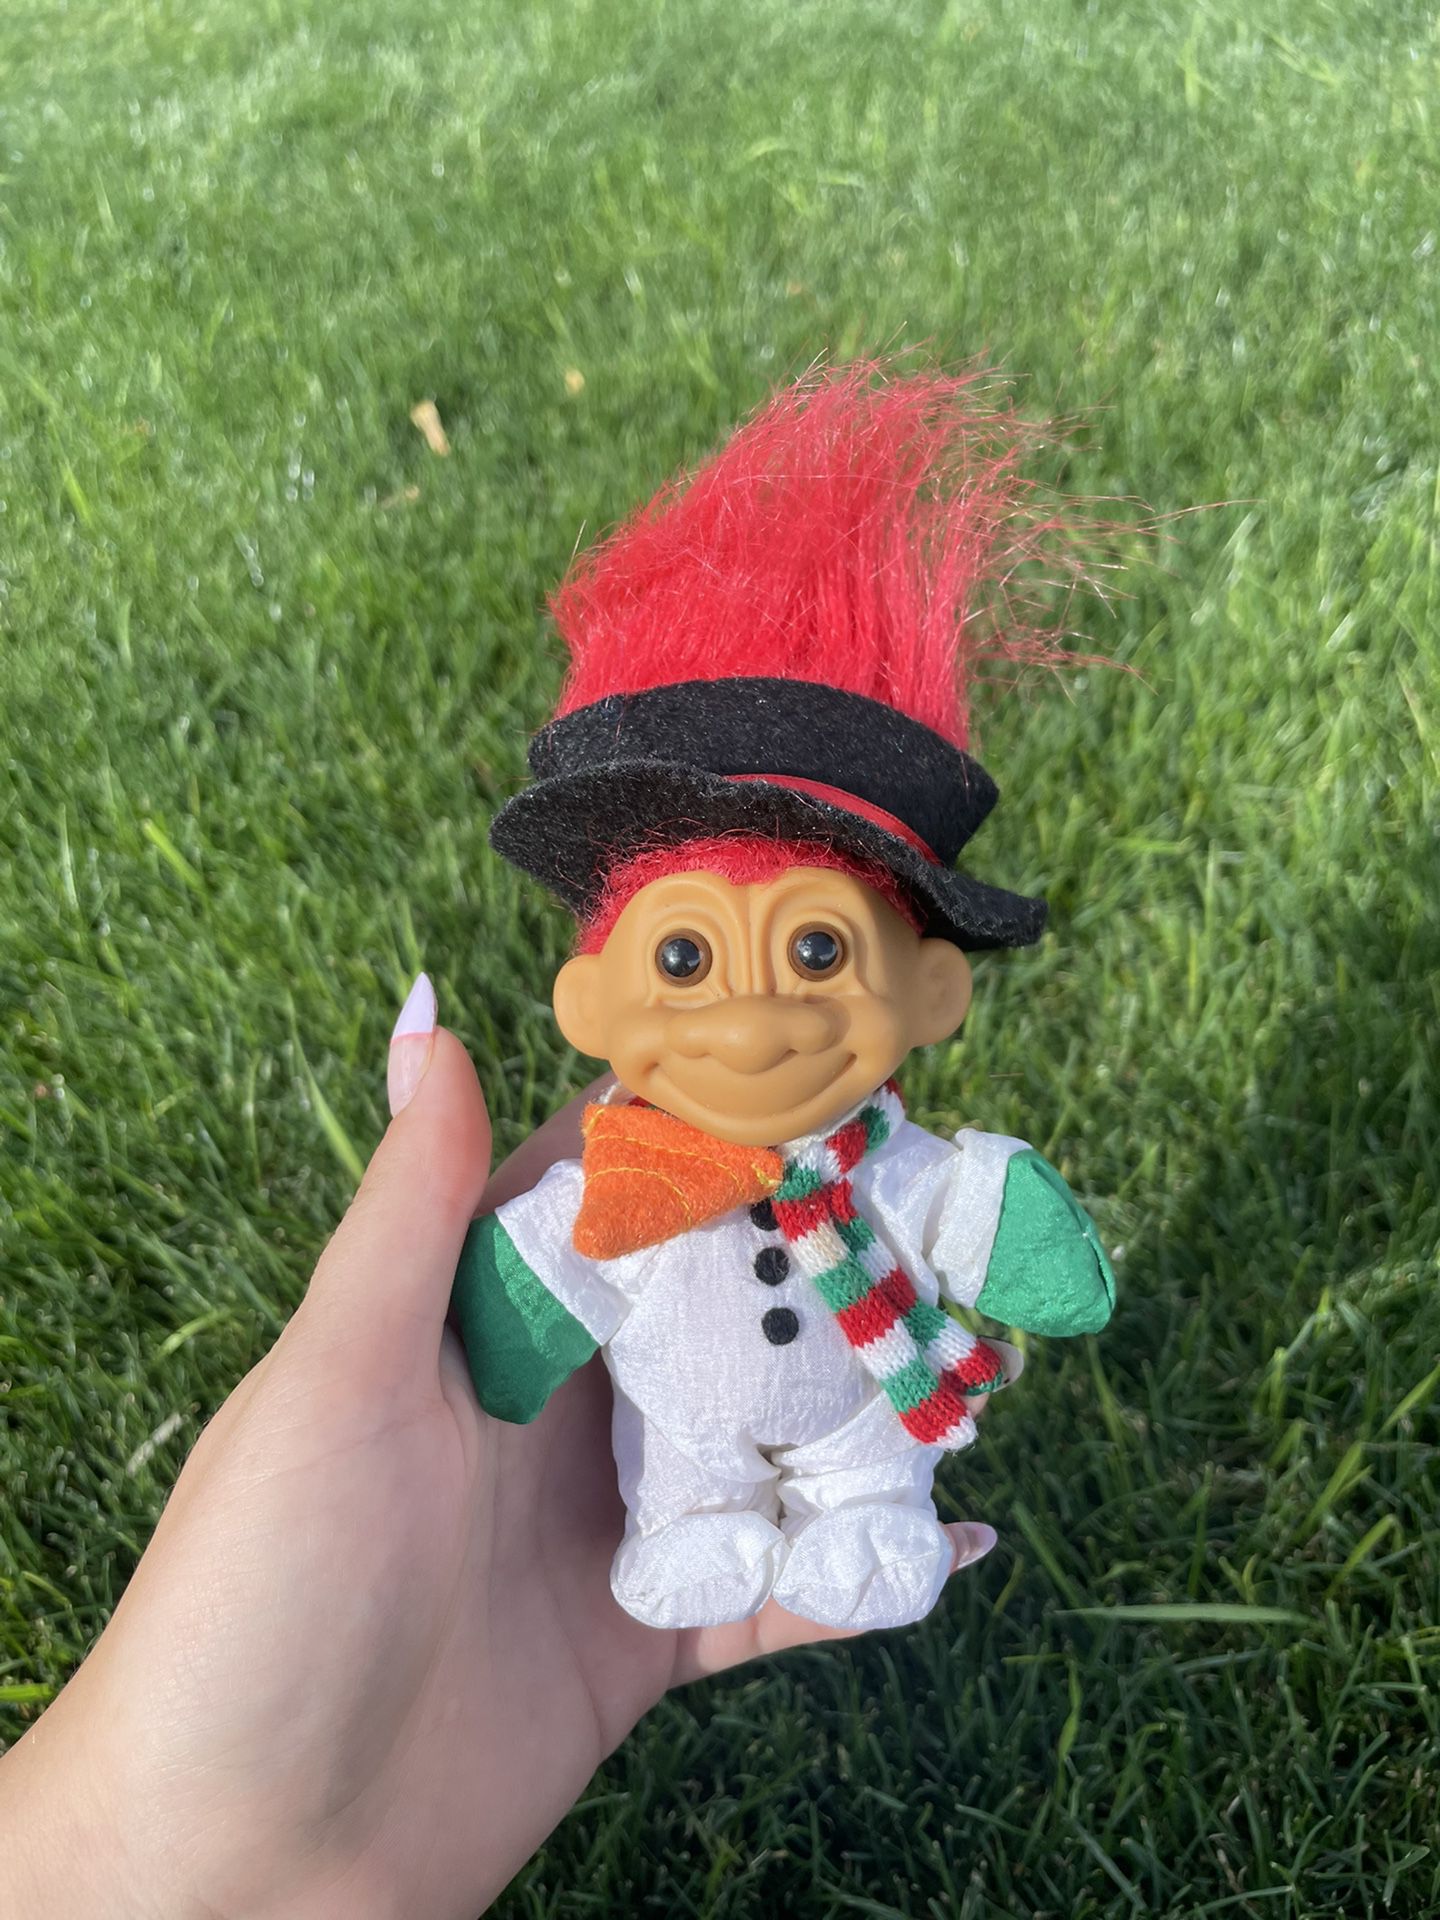 Vintage Russ Snowman Suit Troll Doll w/ Christmas Scarf Hat Nose W/Red Hair